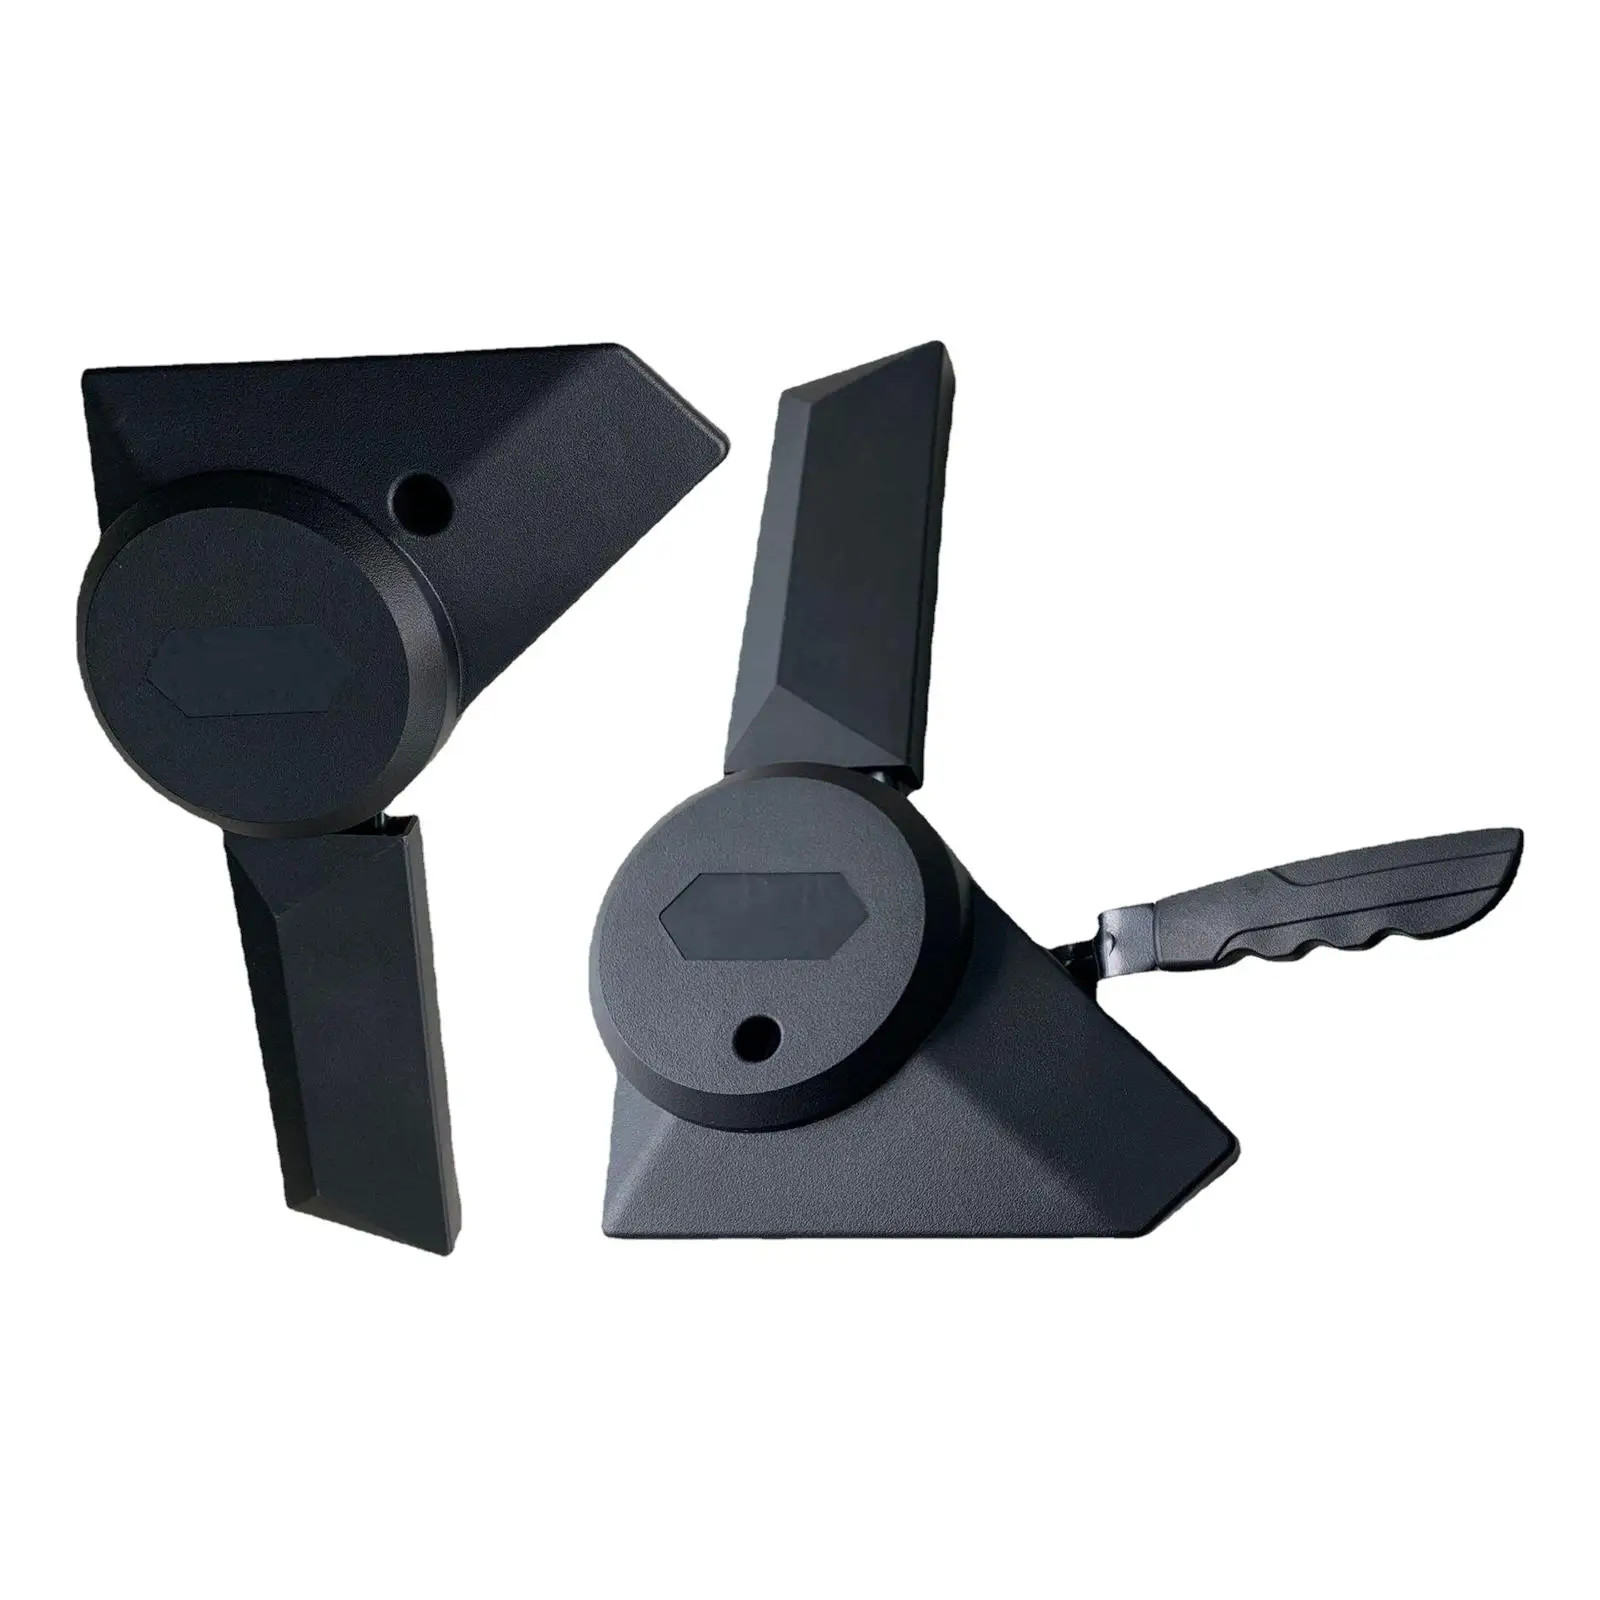 https://ae01.alicdn.com/kf/Sf1a229a805f747a181009d9cca107e1d9/2x-High-Back-Swivel-Computer-Desk-Chair-Angle-Adjuster-Mounting-Replacement-Gaming-Chair-Angle-Adjuster-for.jpg